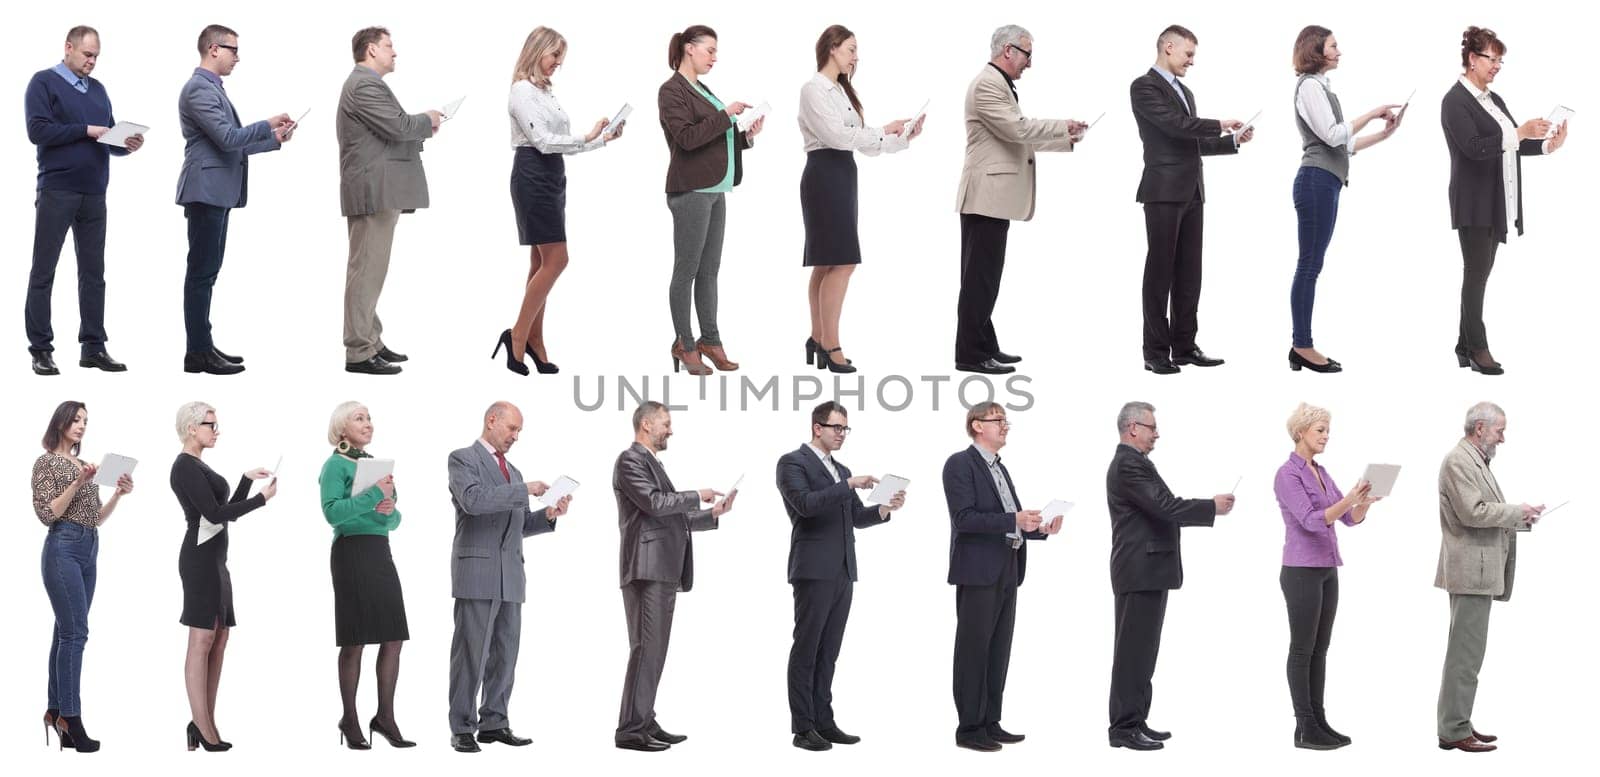 group of people holding tablet and looking ahead isolated on white background